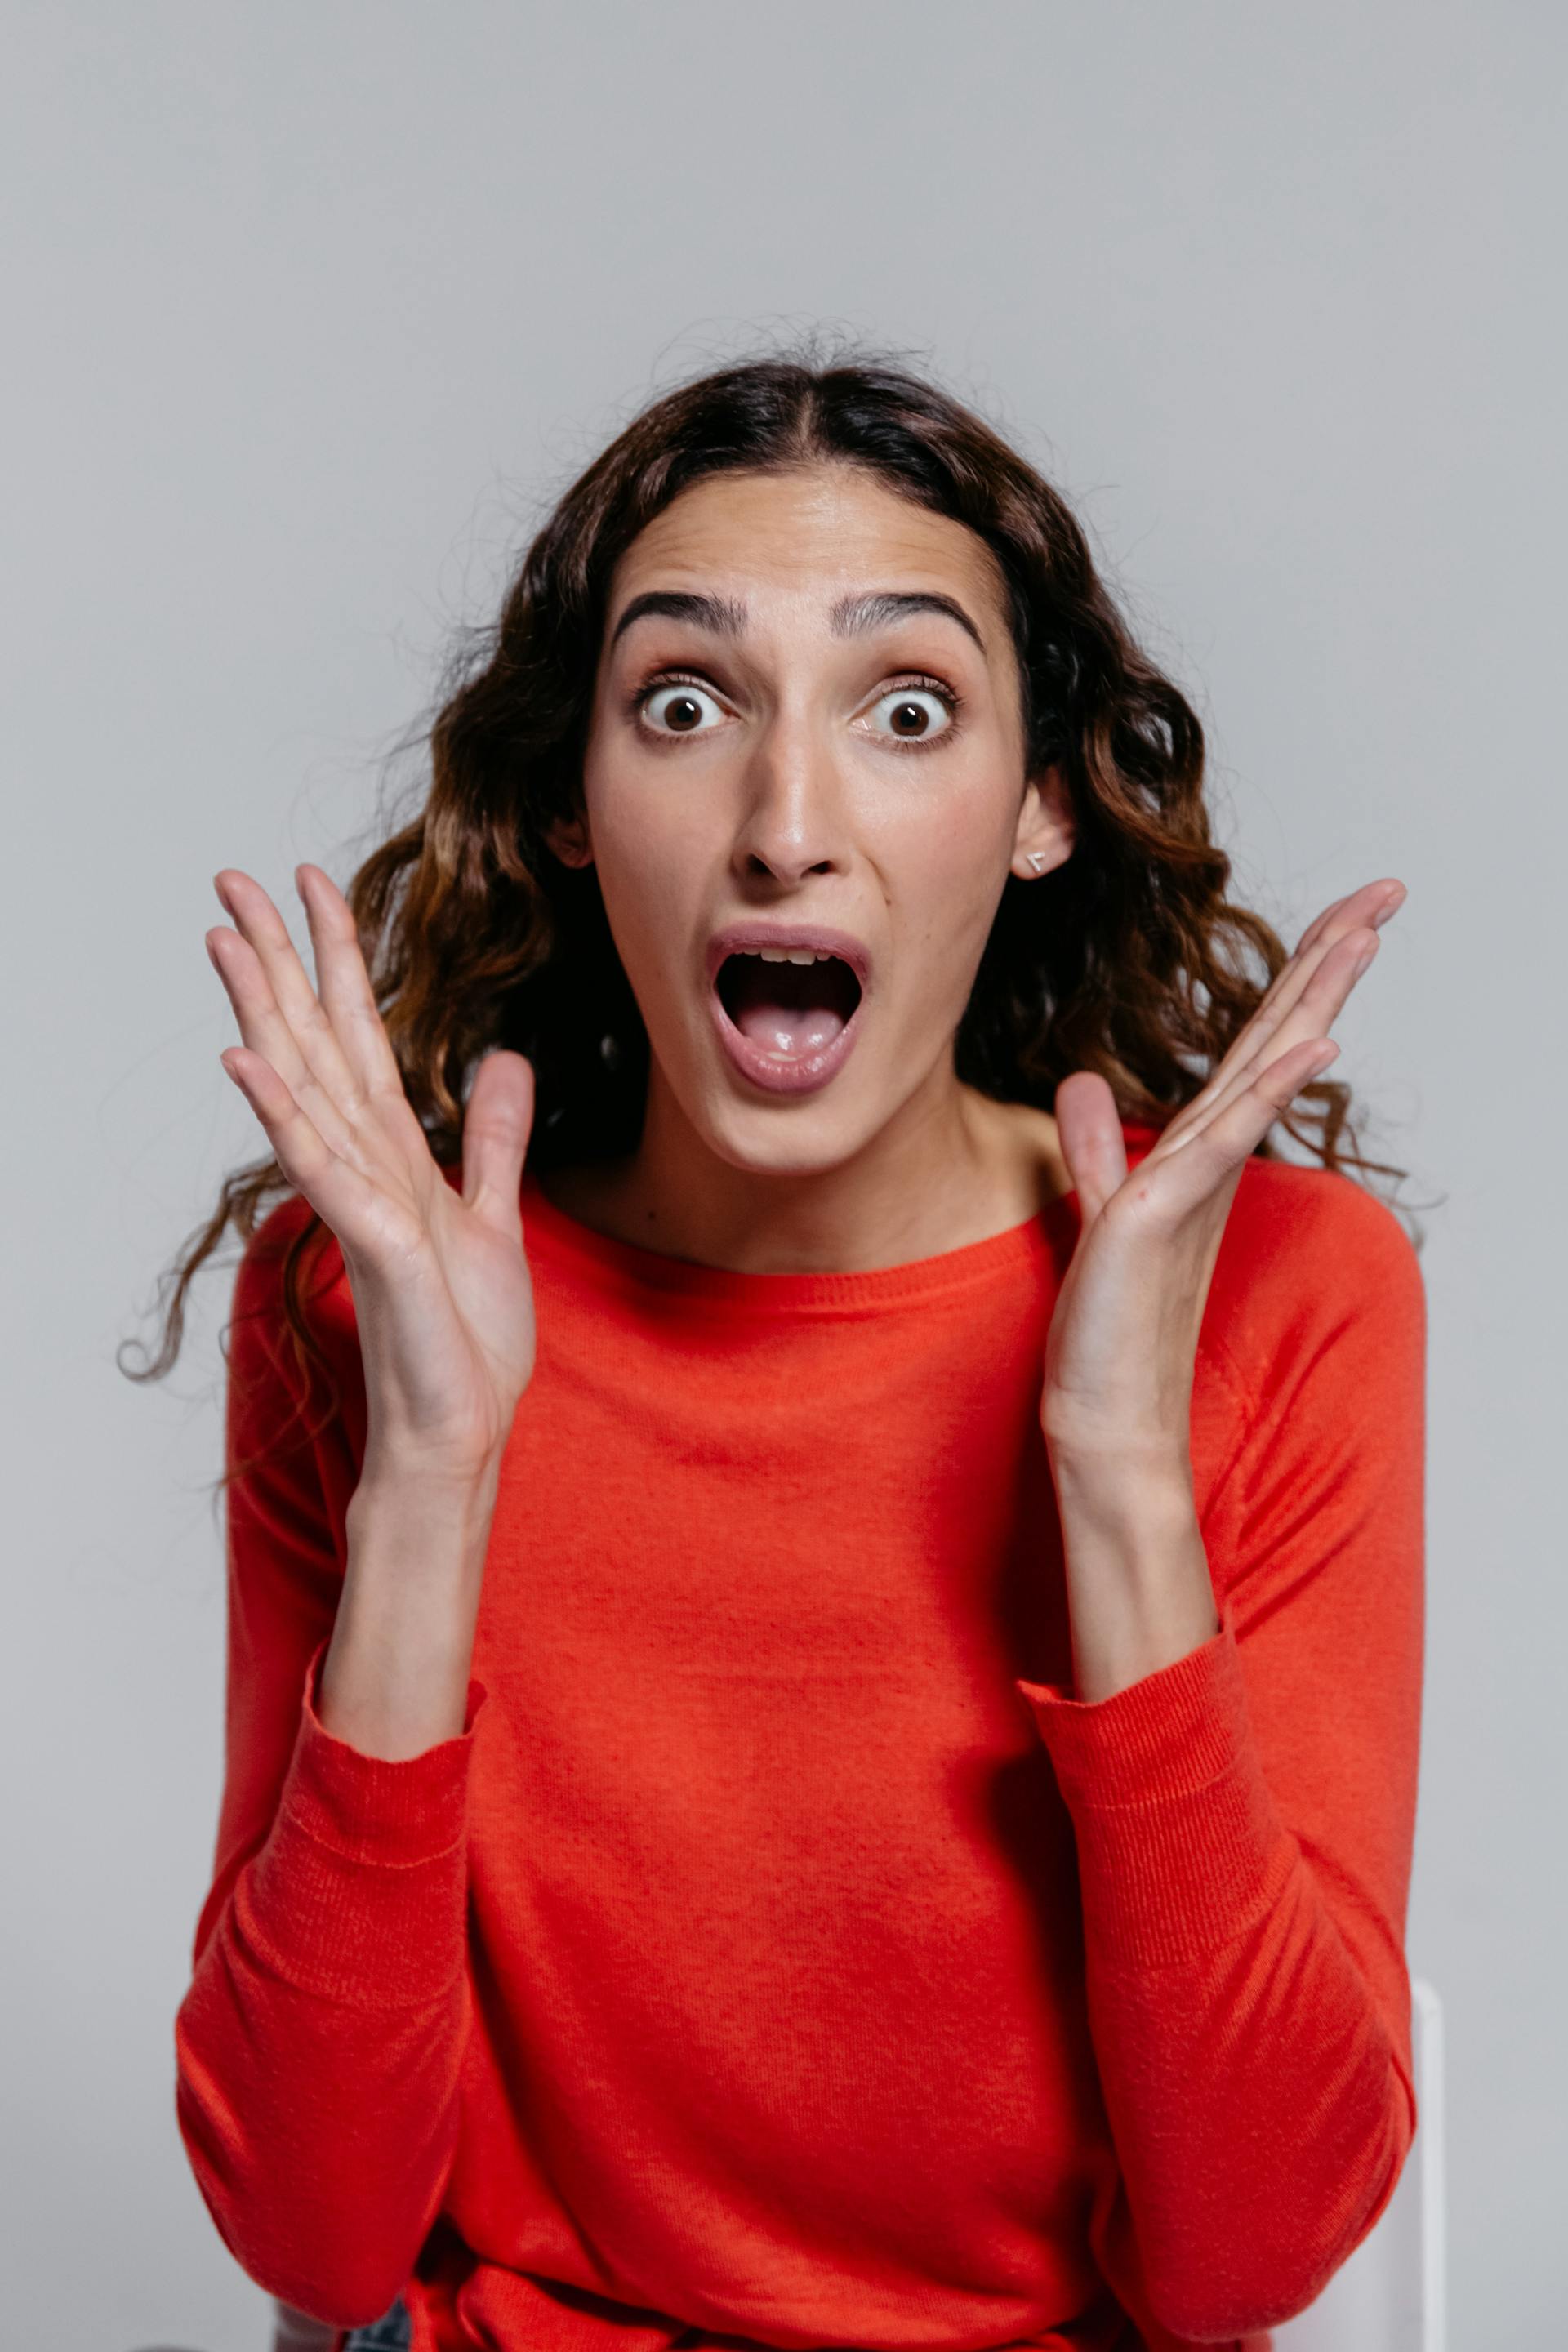 A shocked woman with her hands in the air | Source: Pexels